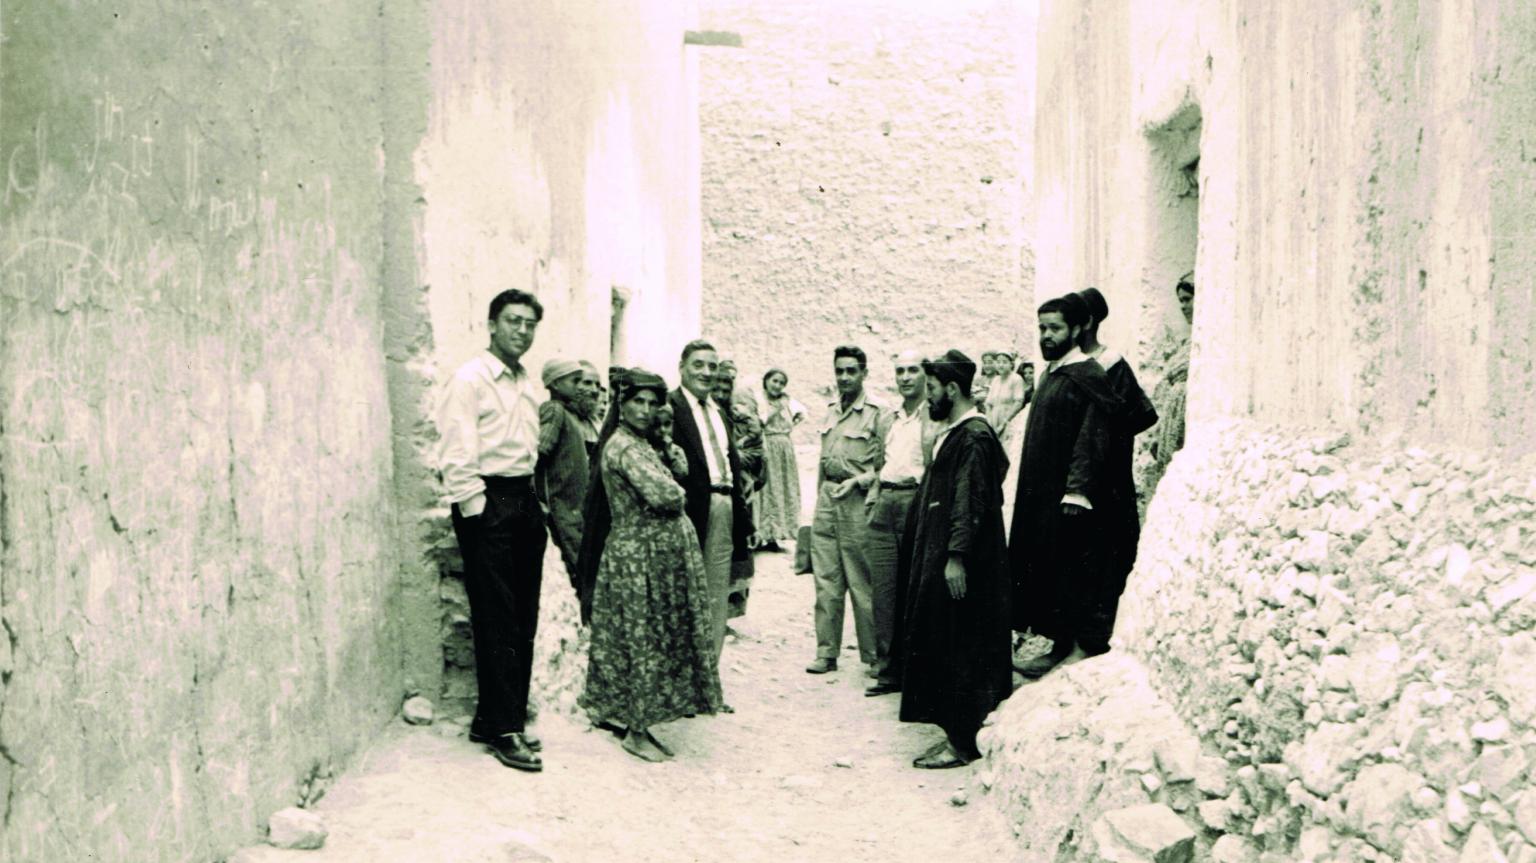 Photograph of men and women in an alley, most facing camera while others look away.